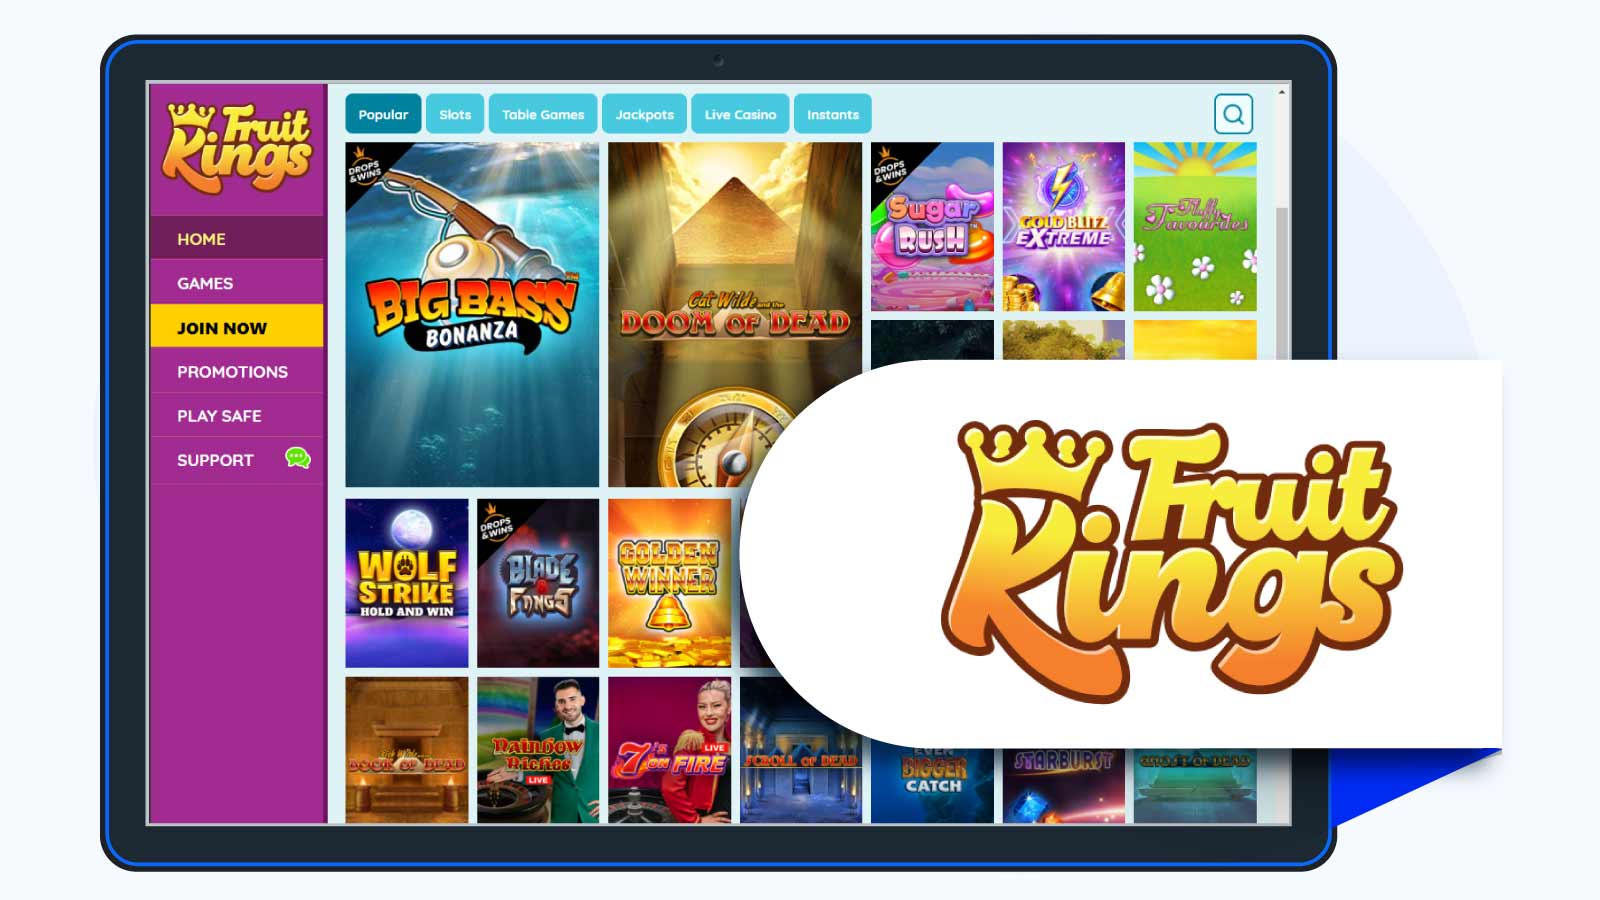 FruitKings Casino – Wager £20 for 100% up to £50 + 100 free spins